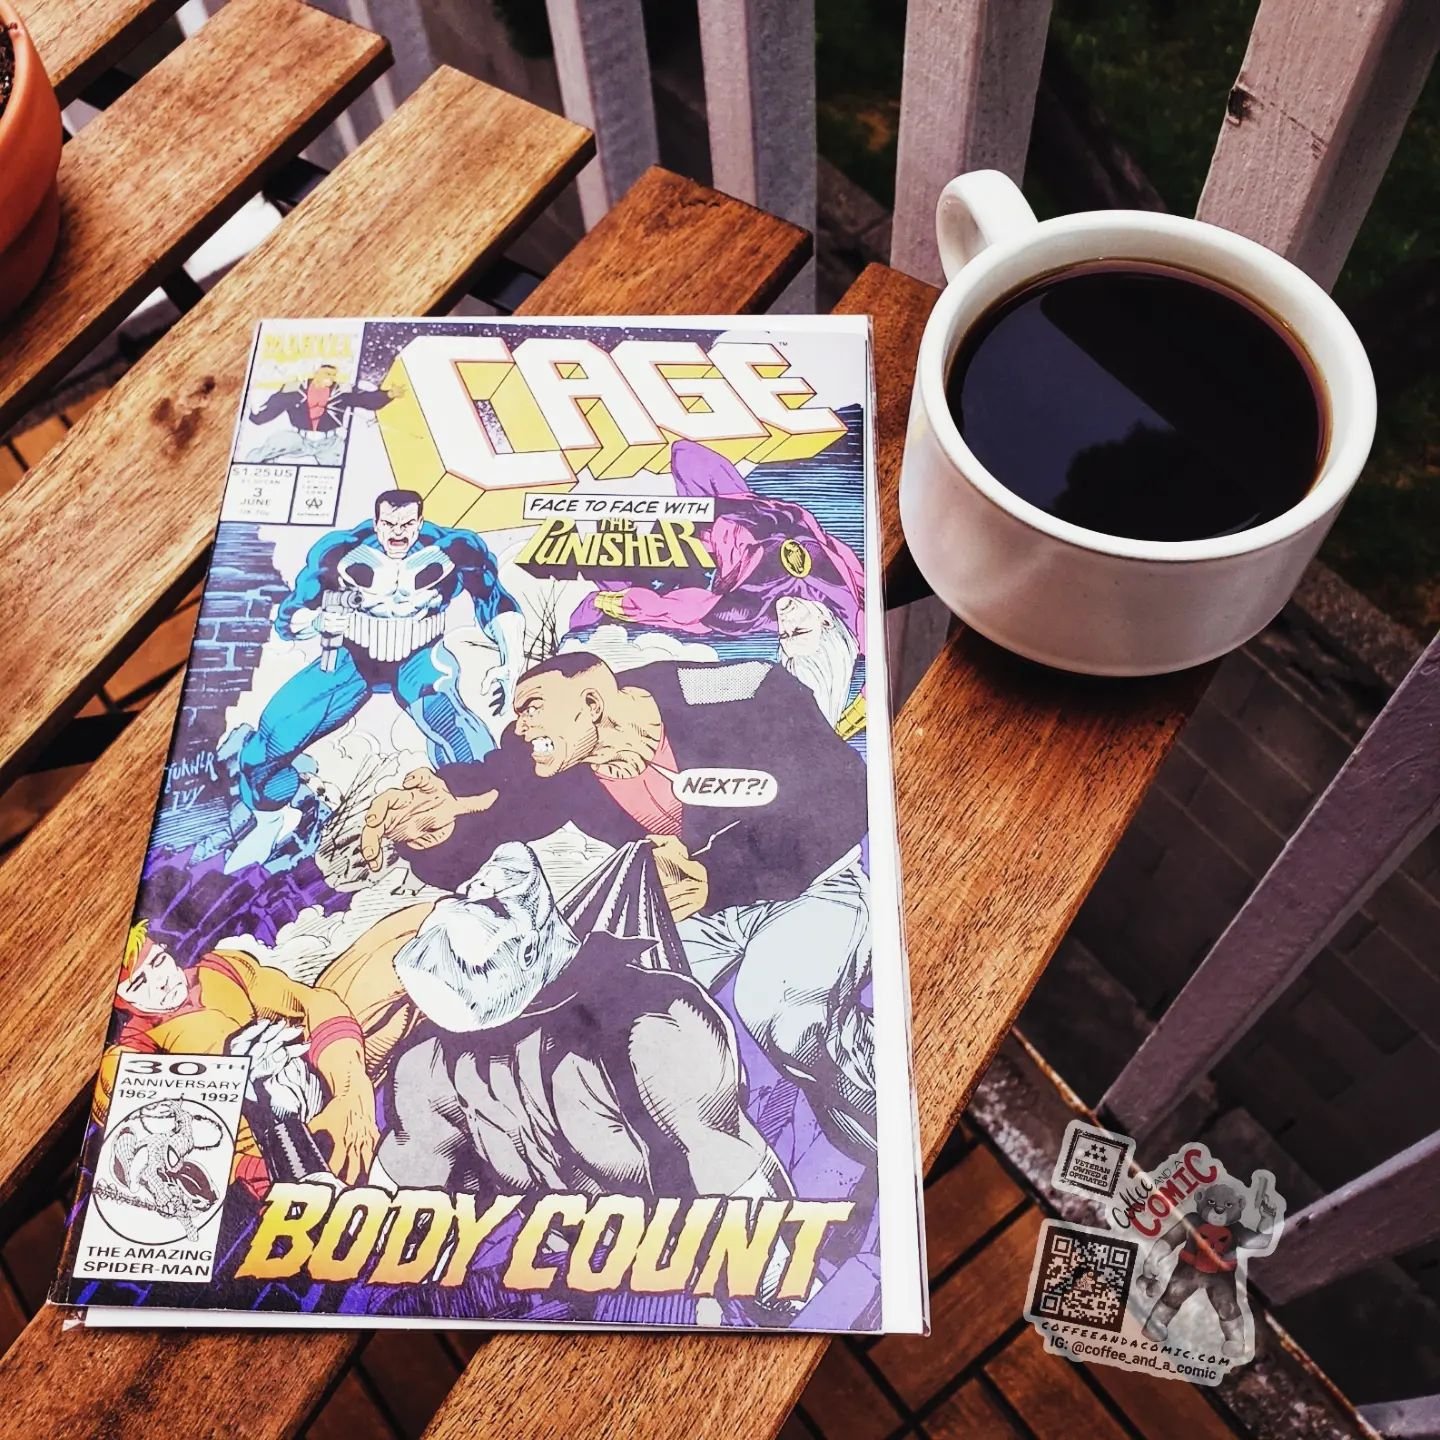 Today's Coffee ☕ and a comic 📓 is Cage 3, illustrated by Dwayne Turner and Chris Ivy, Cage finds himself in a showdown with Hardcore's formidable strike force, the Untouchables. Prepare for 36 pages of relentless action and gripping drama! 

#CageCo